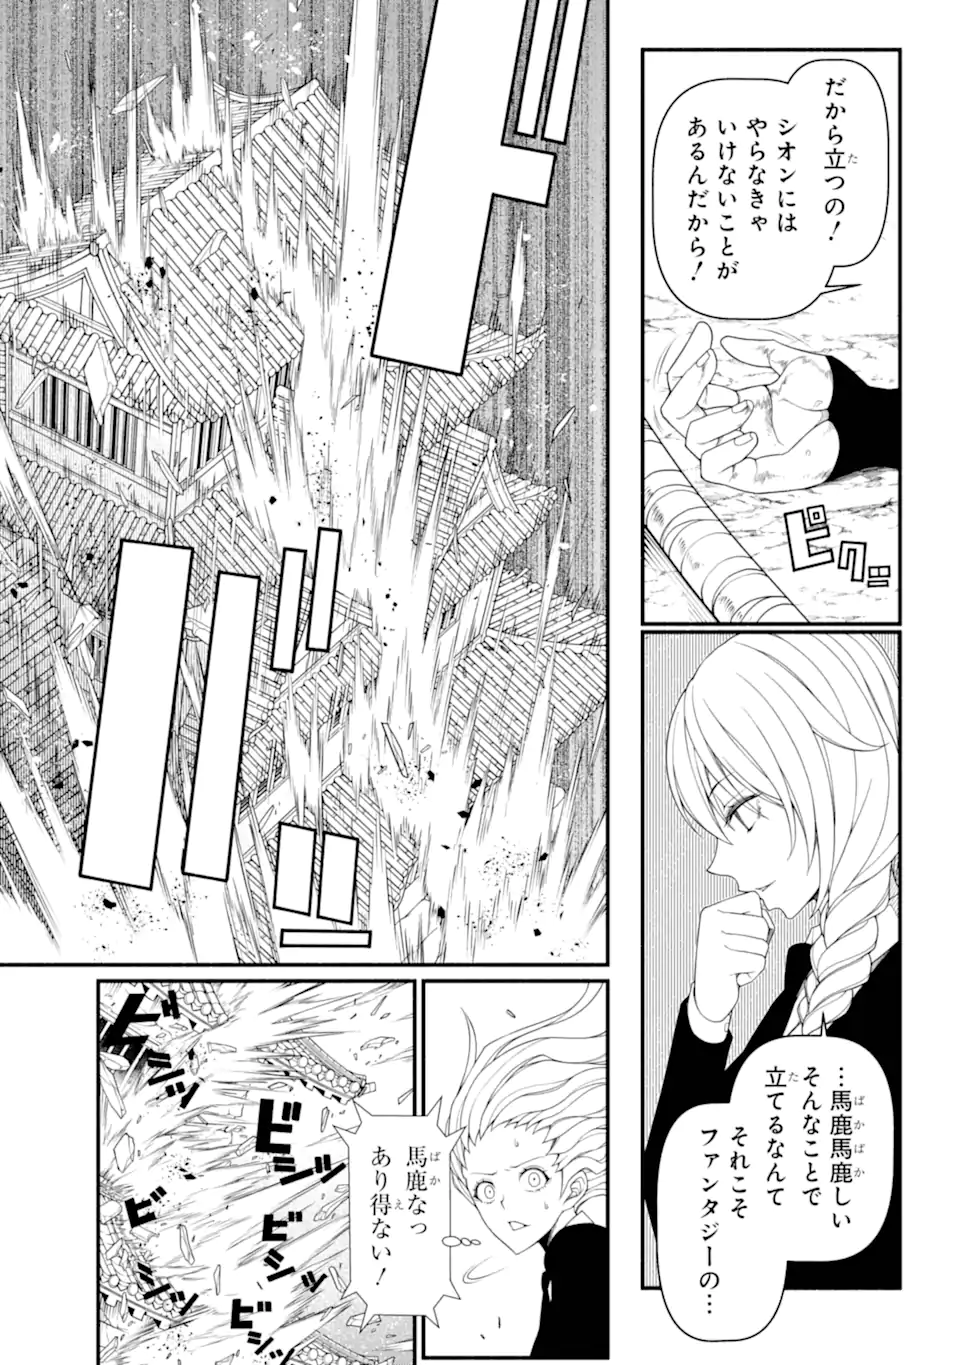 Isekai Cheat Breakers - Chapter 11.1 - Page 3